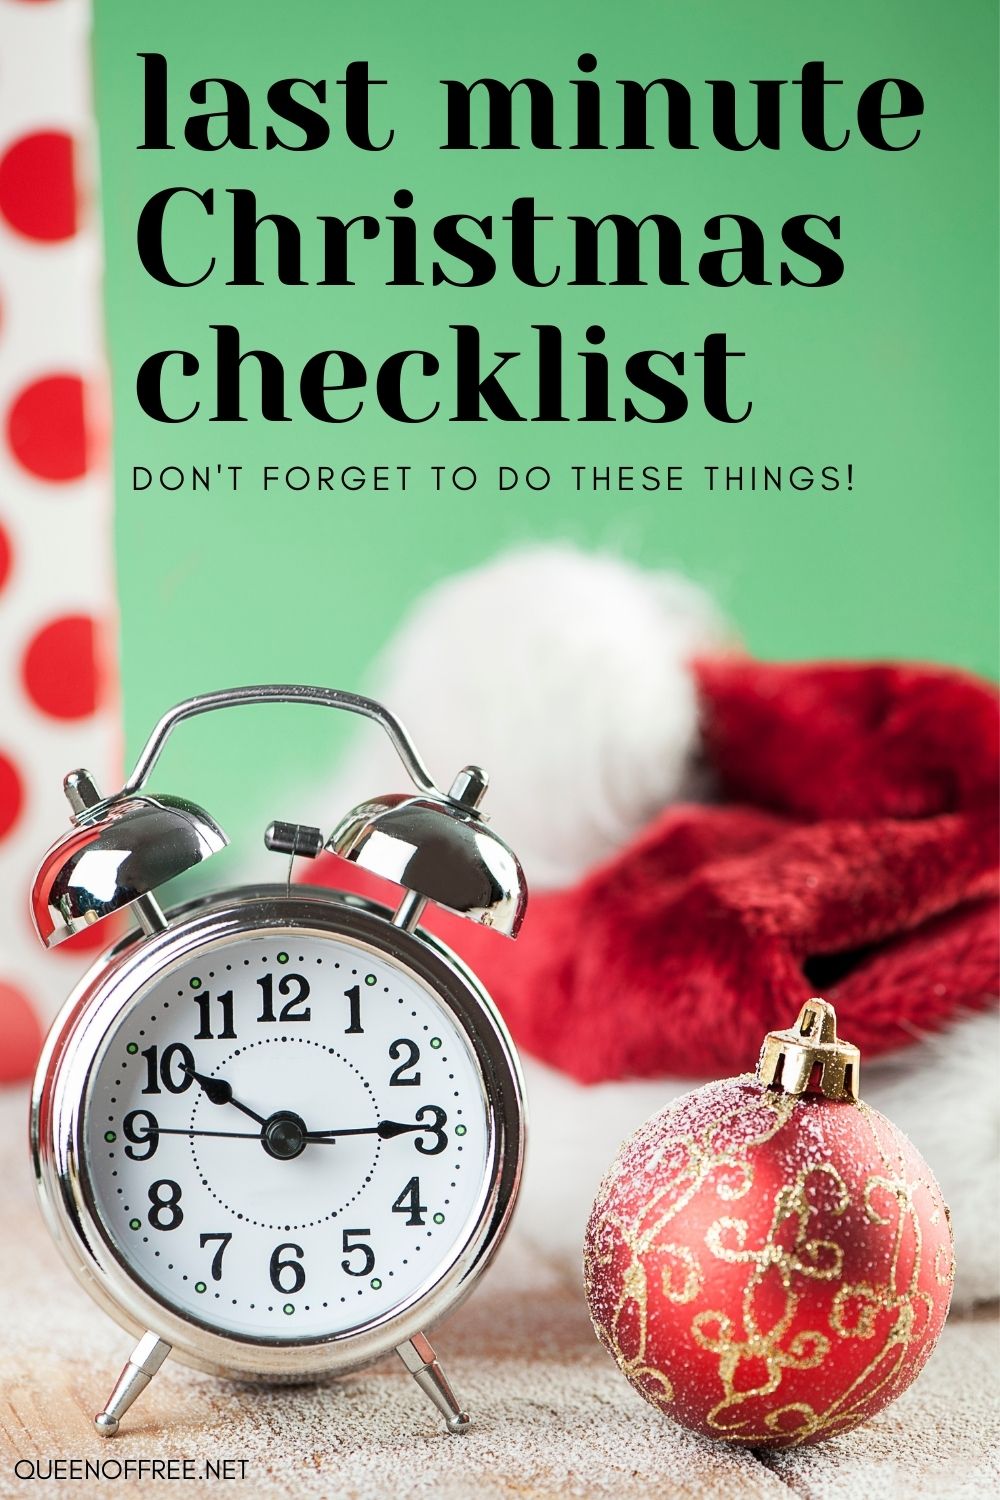 The countdown is on! Here's your last minute Christmas checklist to ensure a financially Merry Christmas and a Happy New Year!